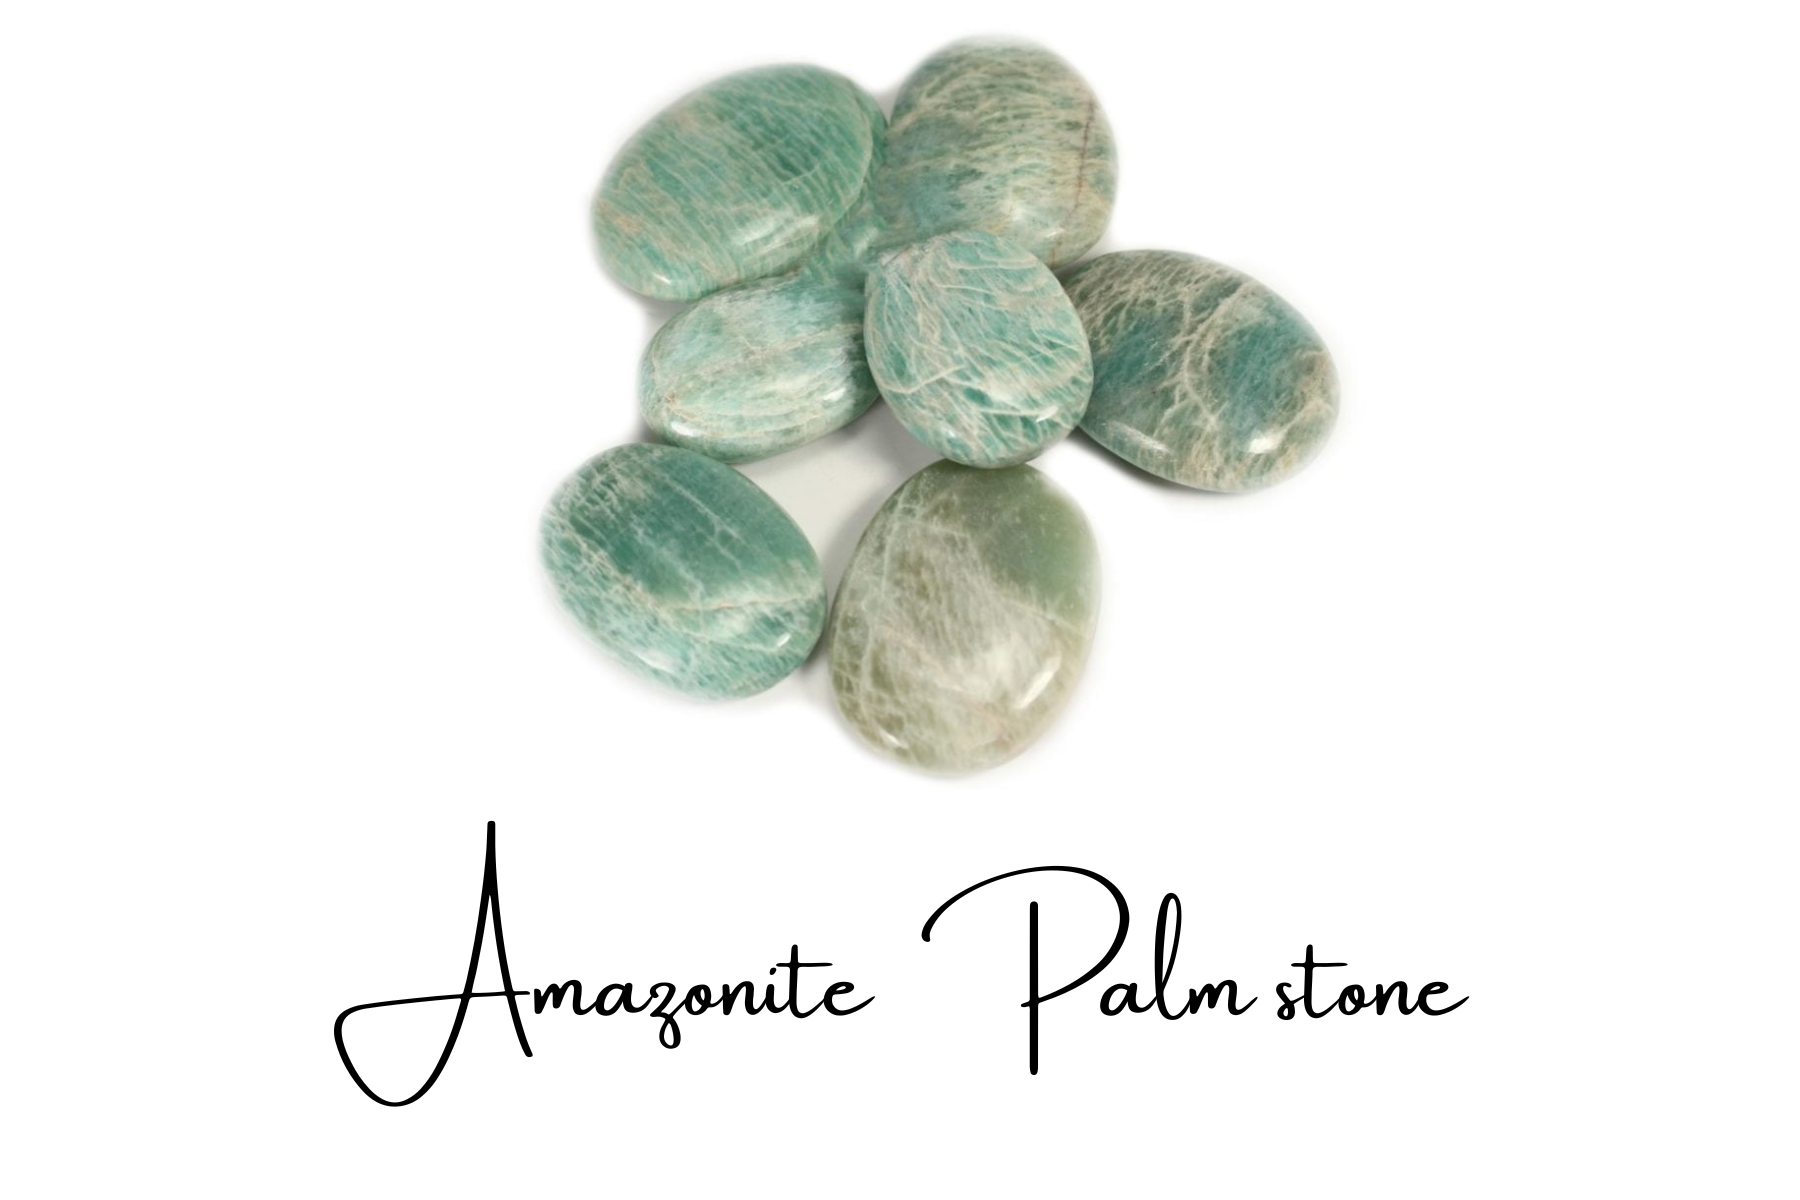 A collection of eight Amazonite Palm stones